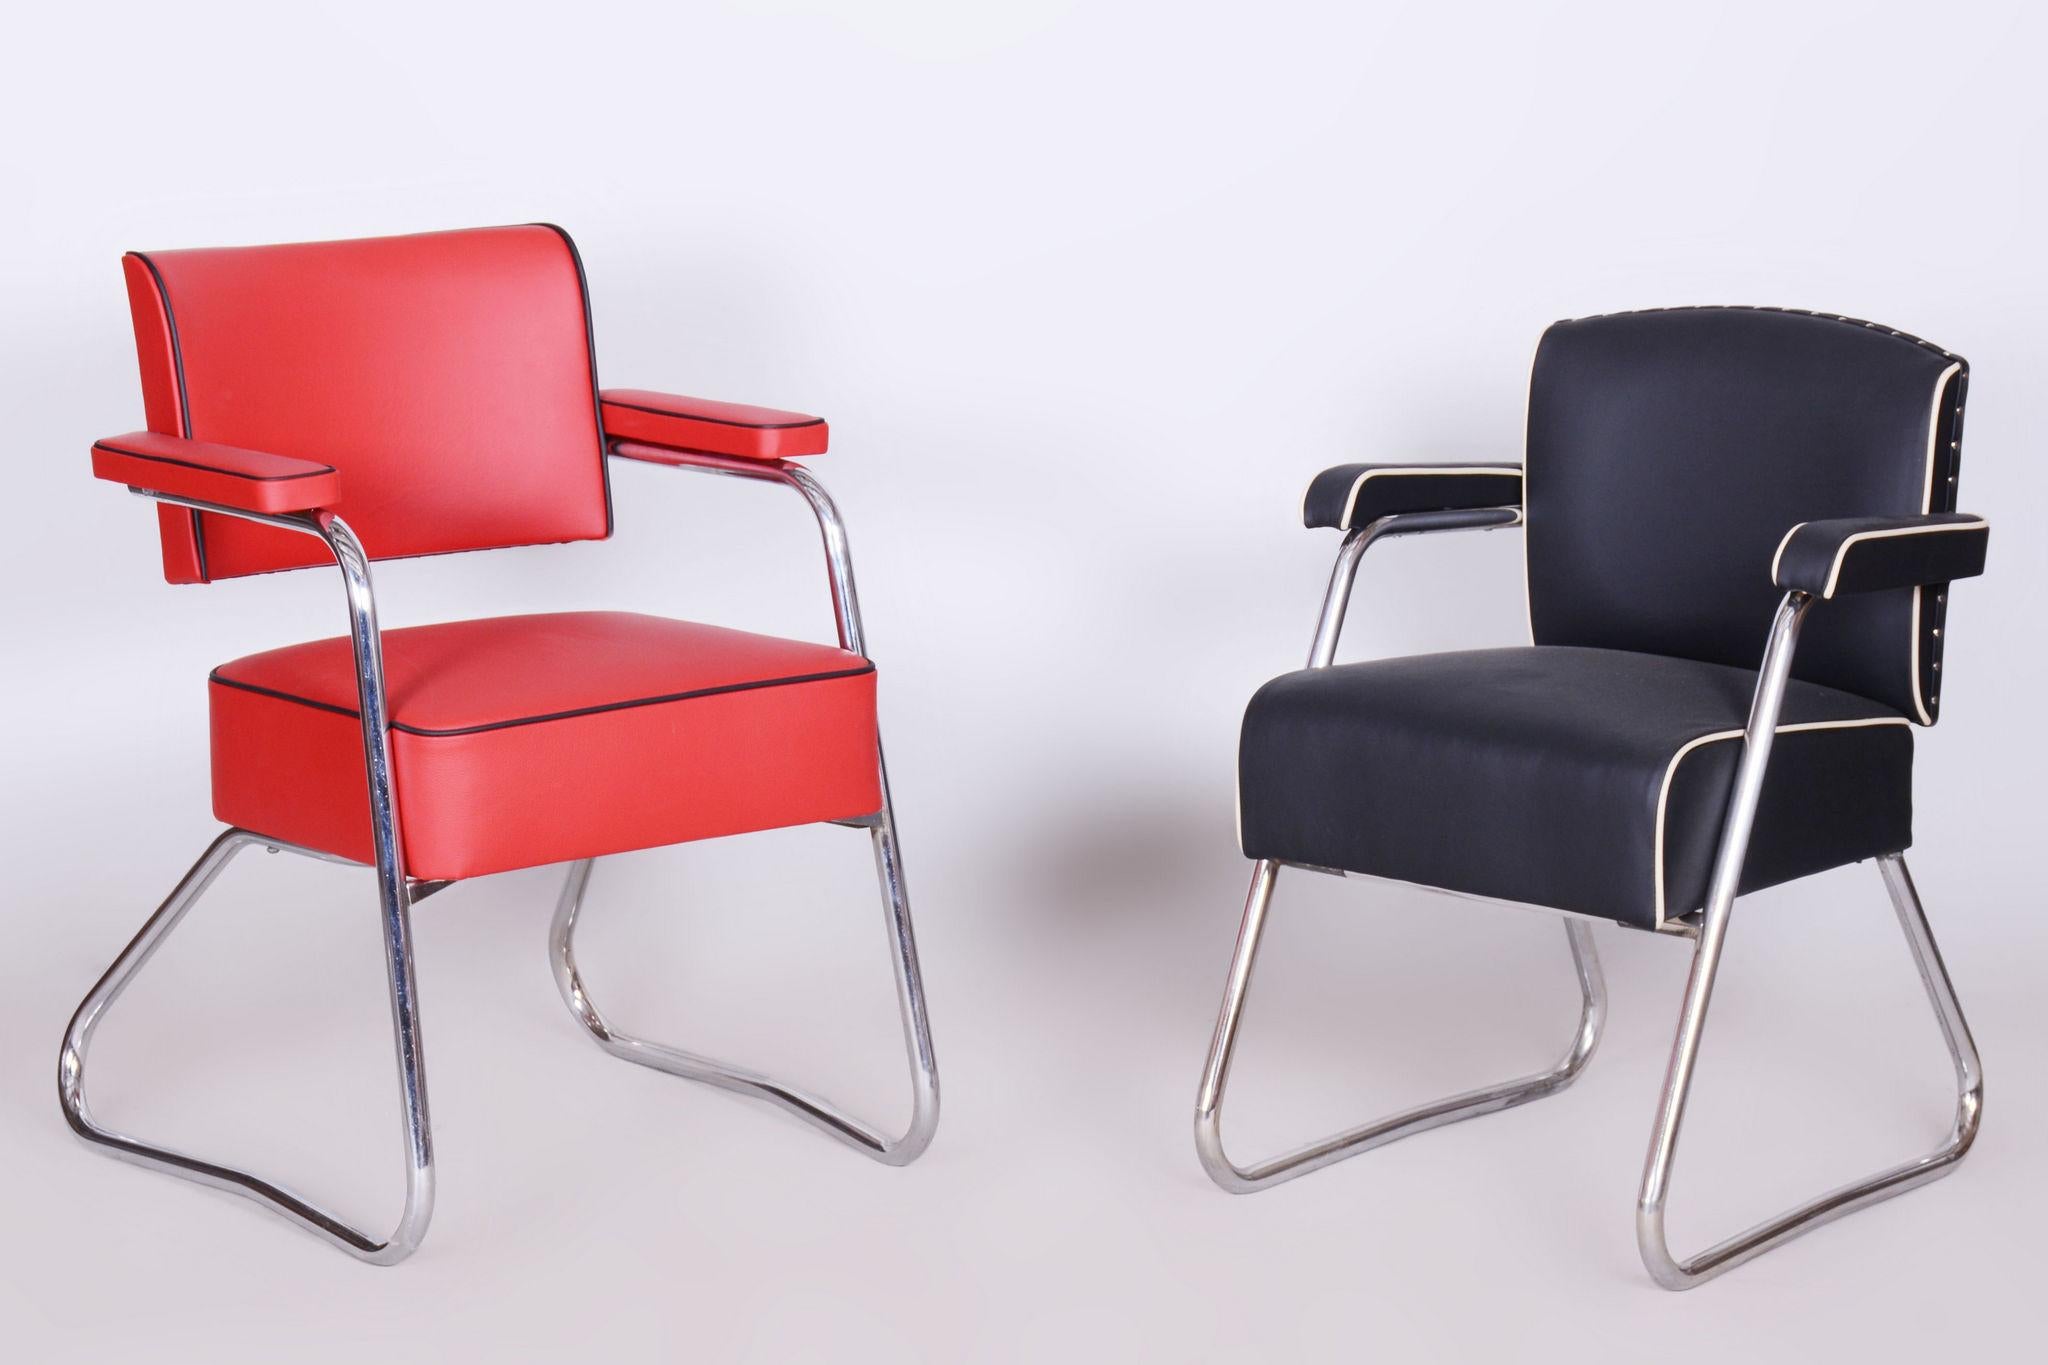 Restored Bauhaus Armchair, Mauser, G. Rohde, Chrome, Leather, Germany, 1930s For Sale 7